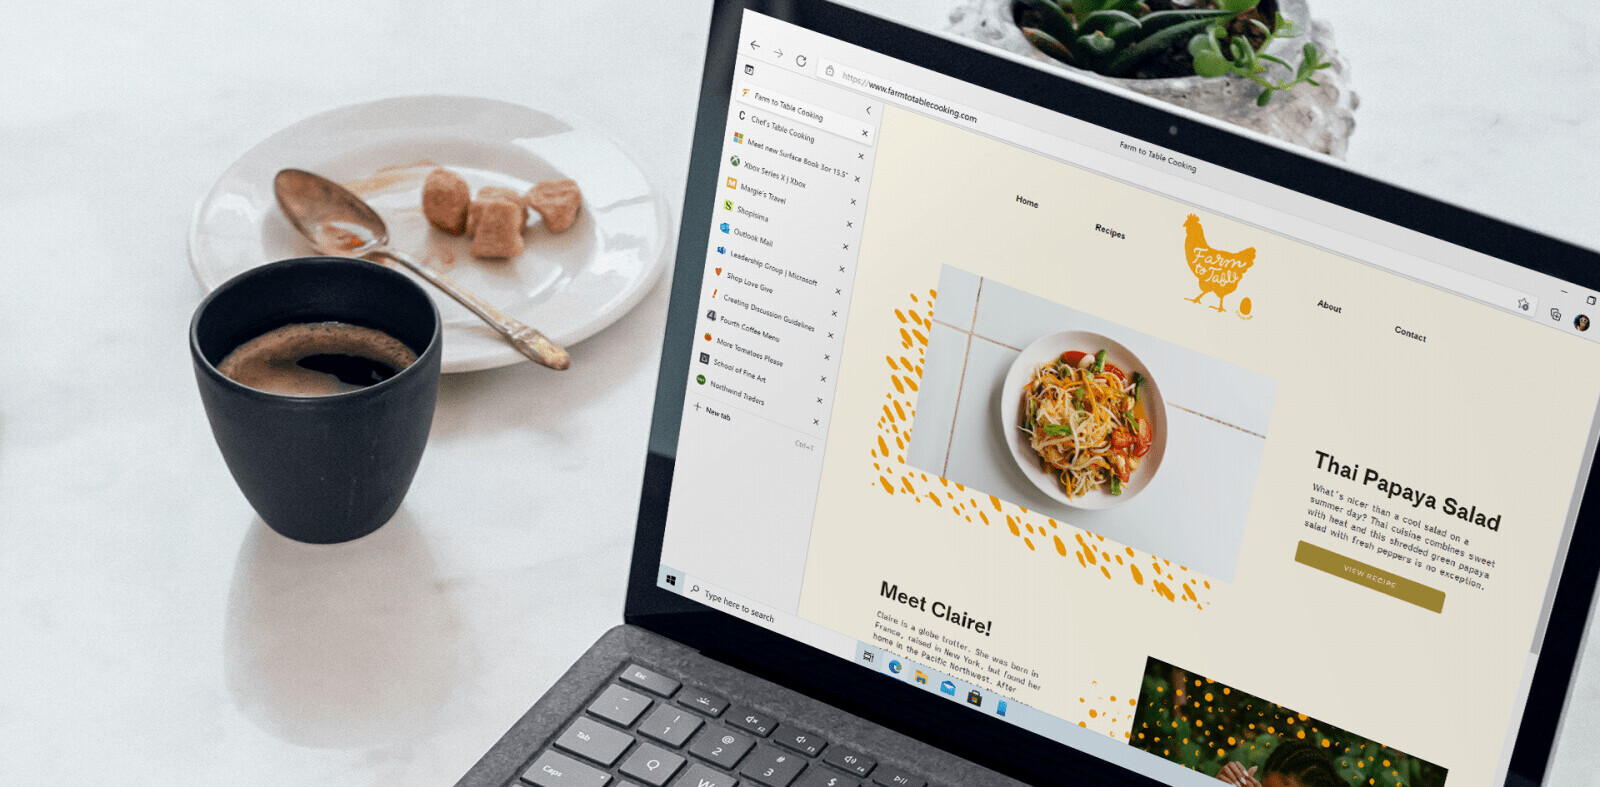 Microsoft brings vertical tabs to Edge and Bing gets better at visual search